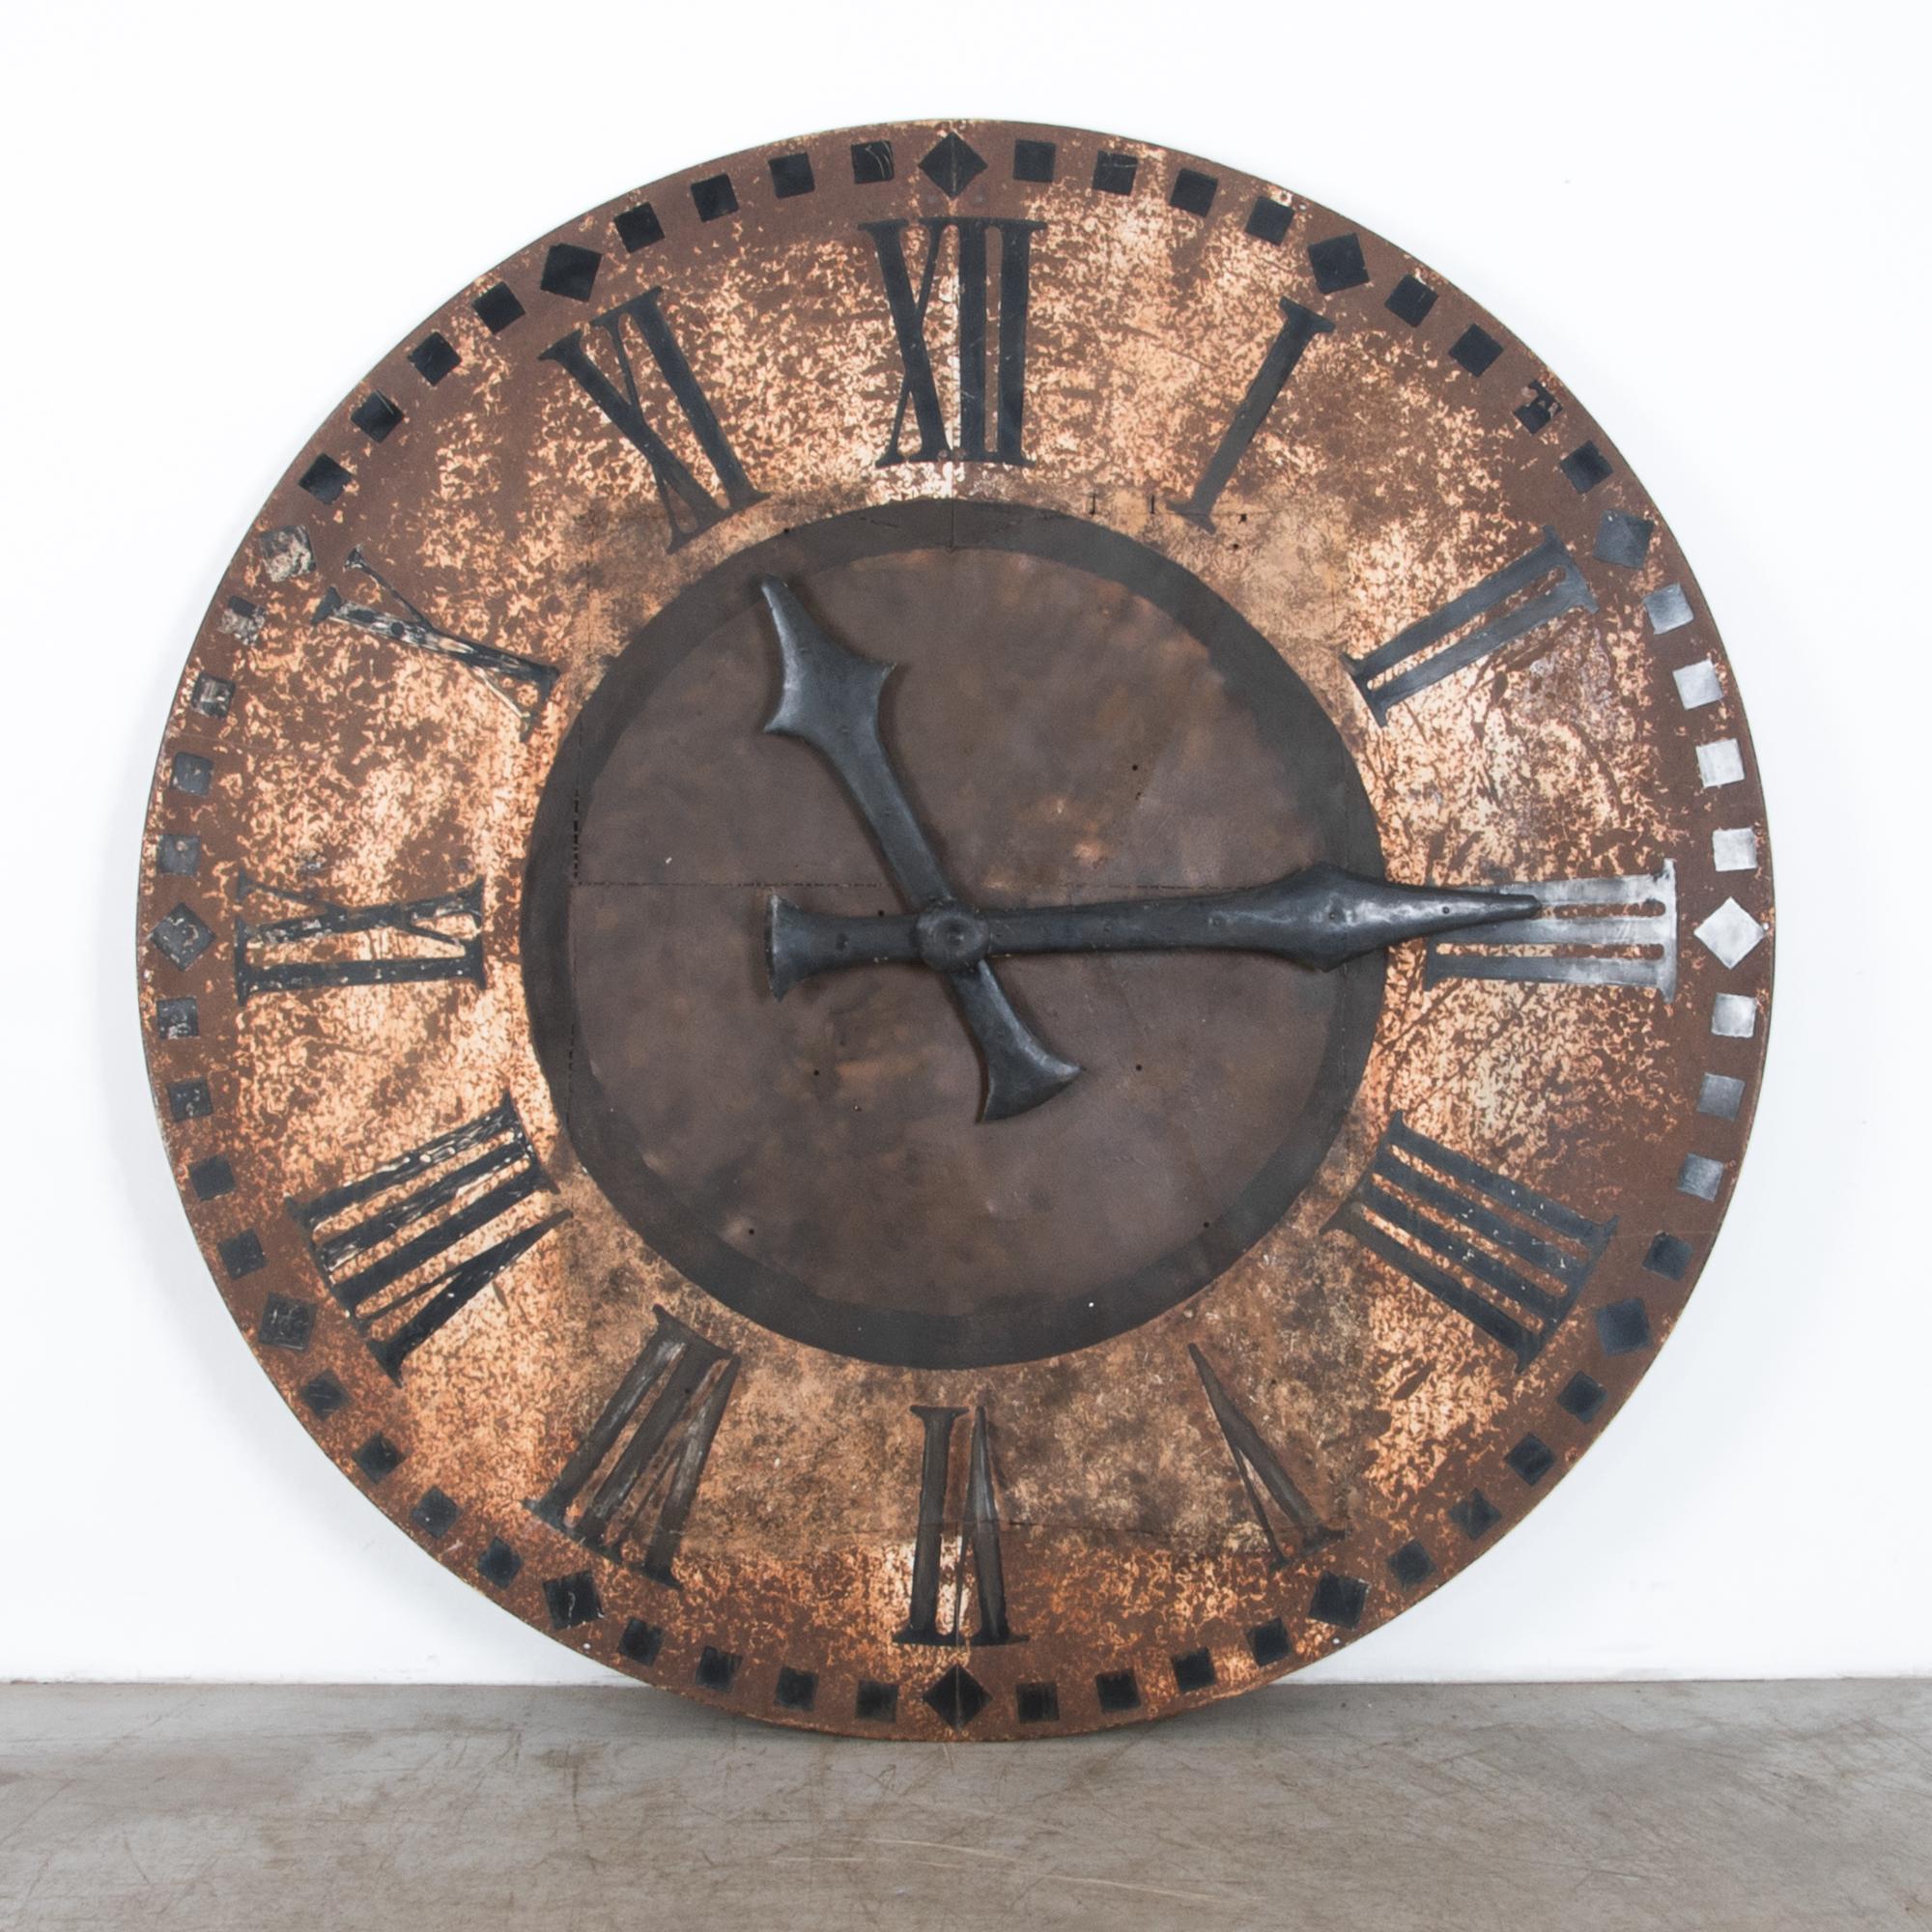 Reclaimed from an aging clock tower, these large scale clock faces were manufactured in France in the late 19th century. Aged after over a century facing the elements, the metal has a beautiful distressed patina with traces of a hand painted black